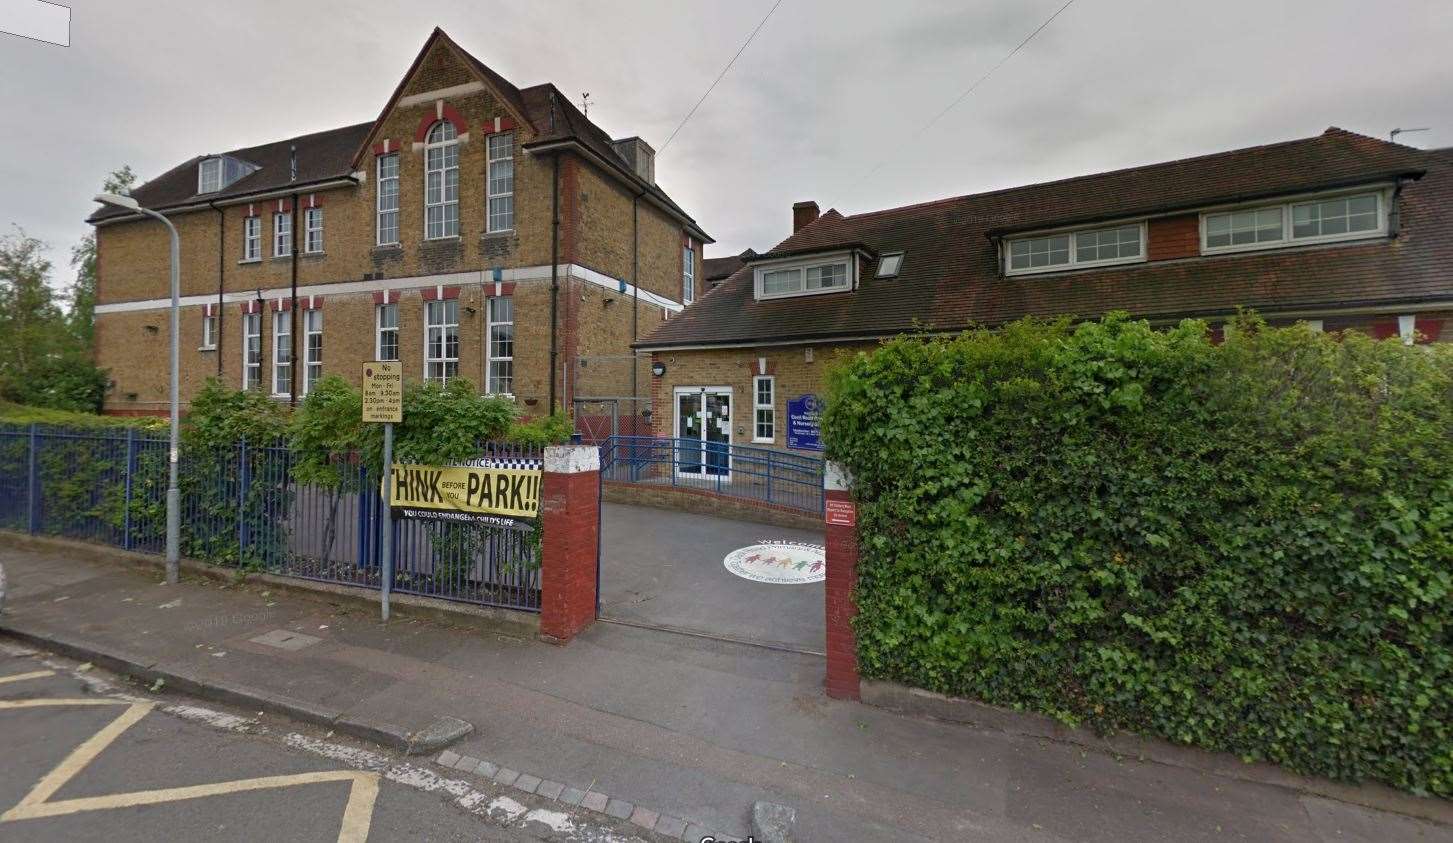 Cecil Road Primary School in Gravesend. Image from Google Maps.